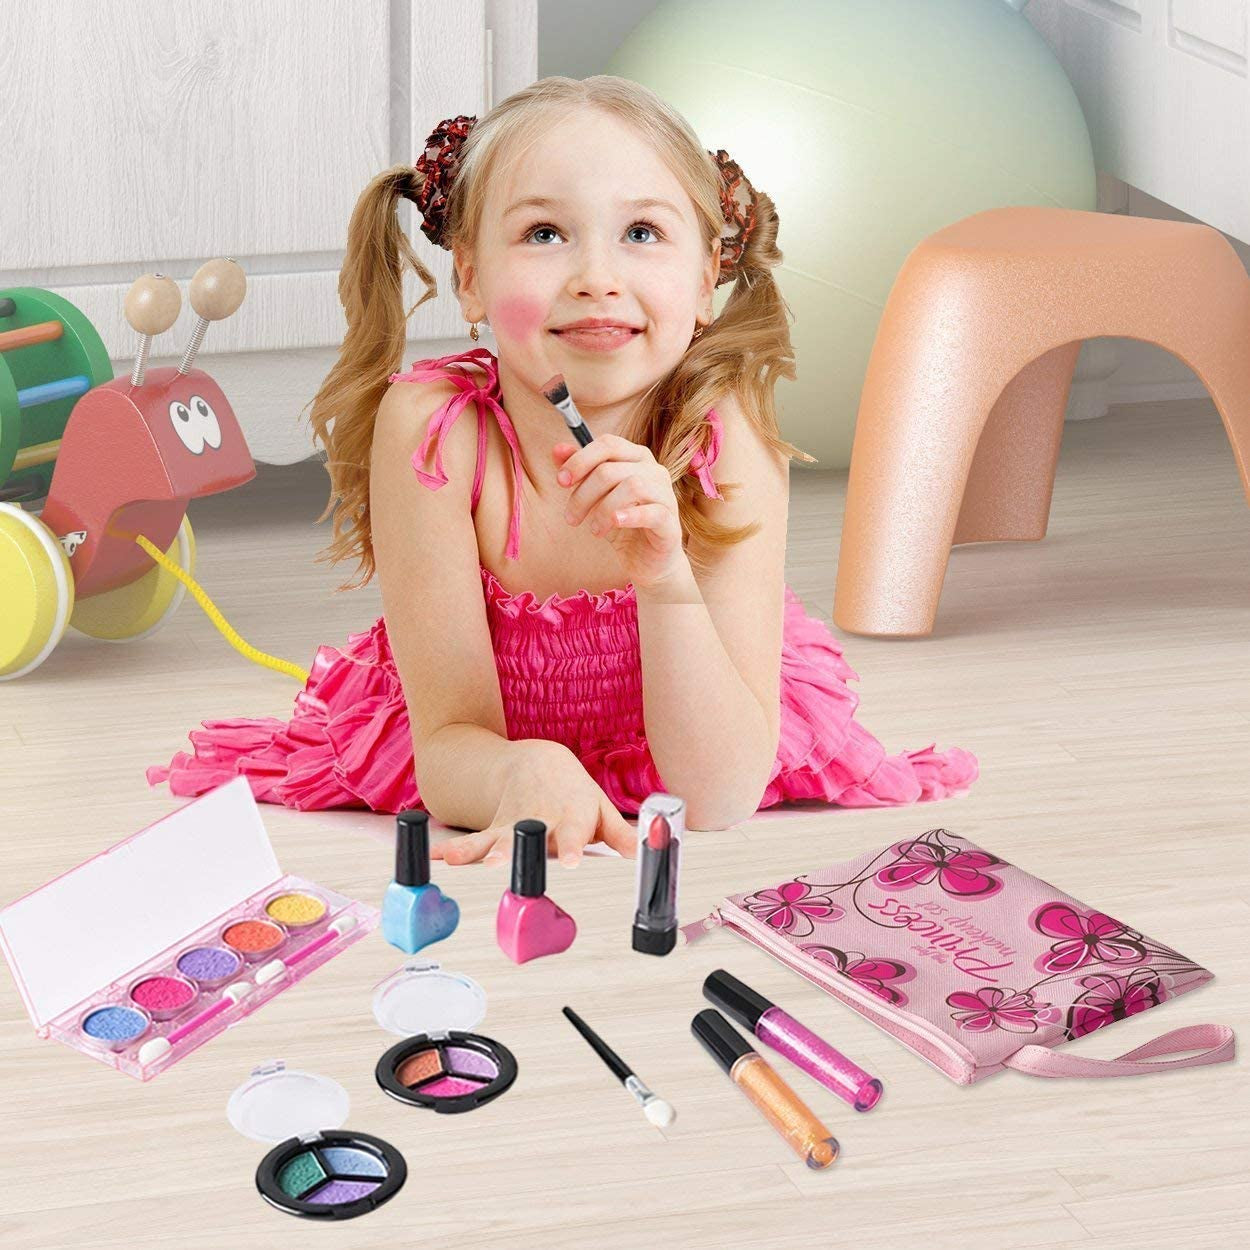 "Princess Glam Beauty Set: Playkidz Real Washable Makeup Kit for Girls - Non Toxic, Complete Dress up Set with Bag (11 PC)"